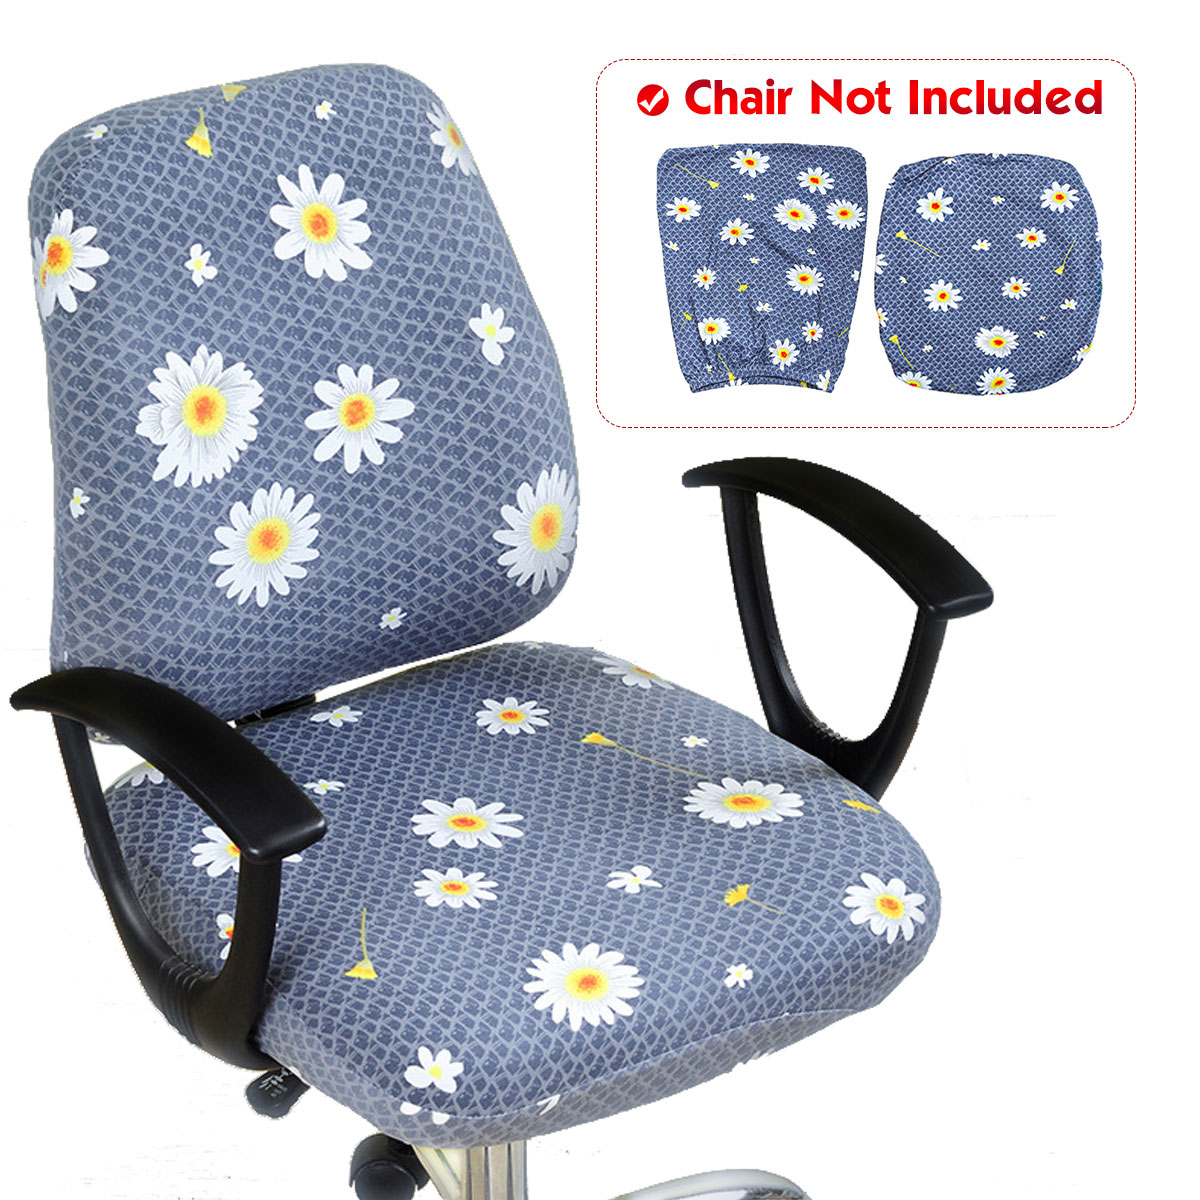 Stretch Jacquard Office Computer Chair Seat Cover, Removable | Washable | Anti-dust | Easy to Put-on, Chair Not Included - image 1 of 7